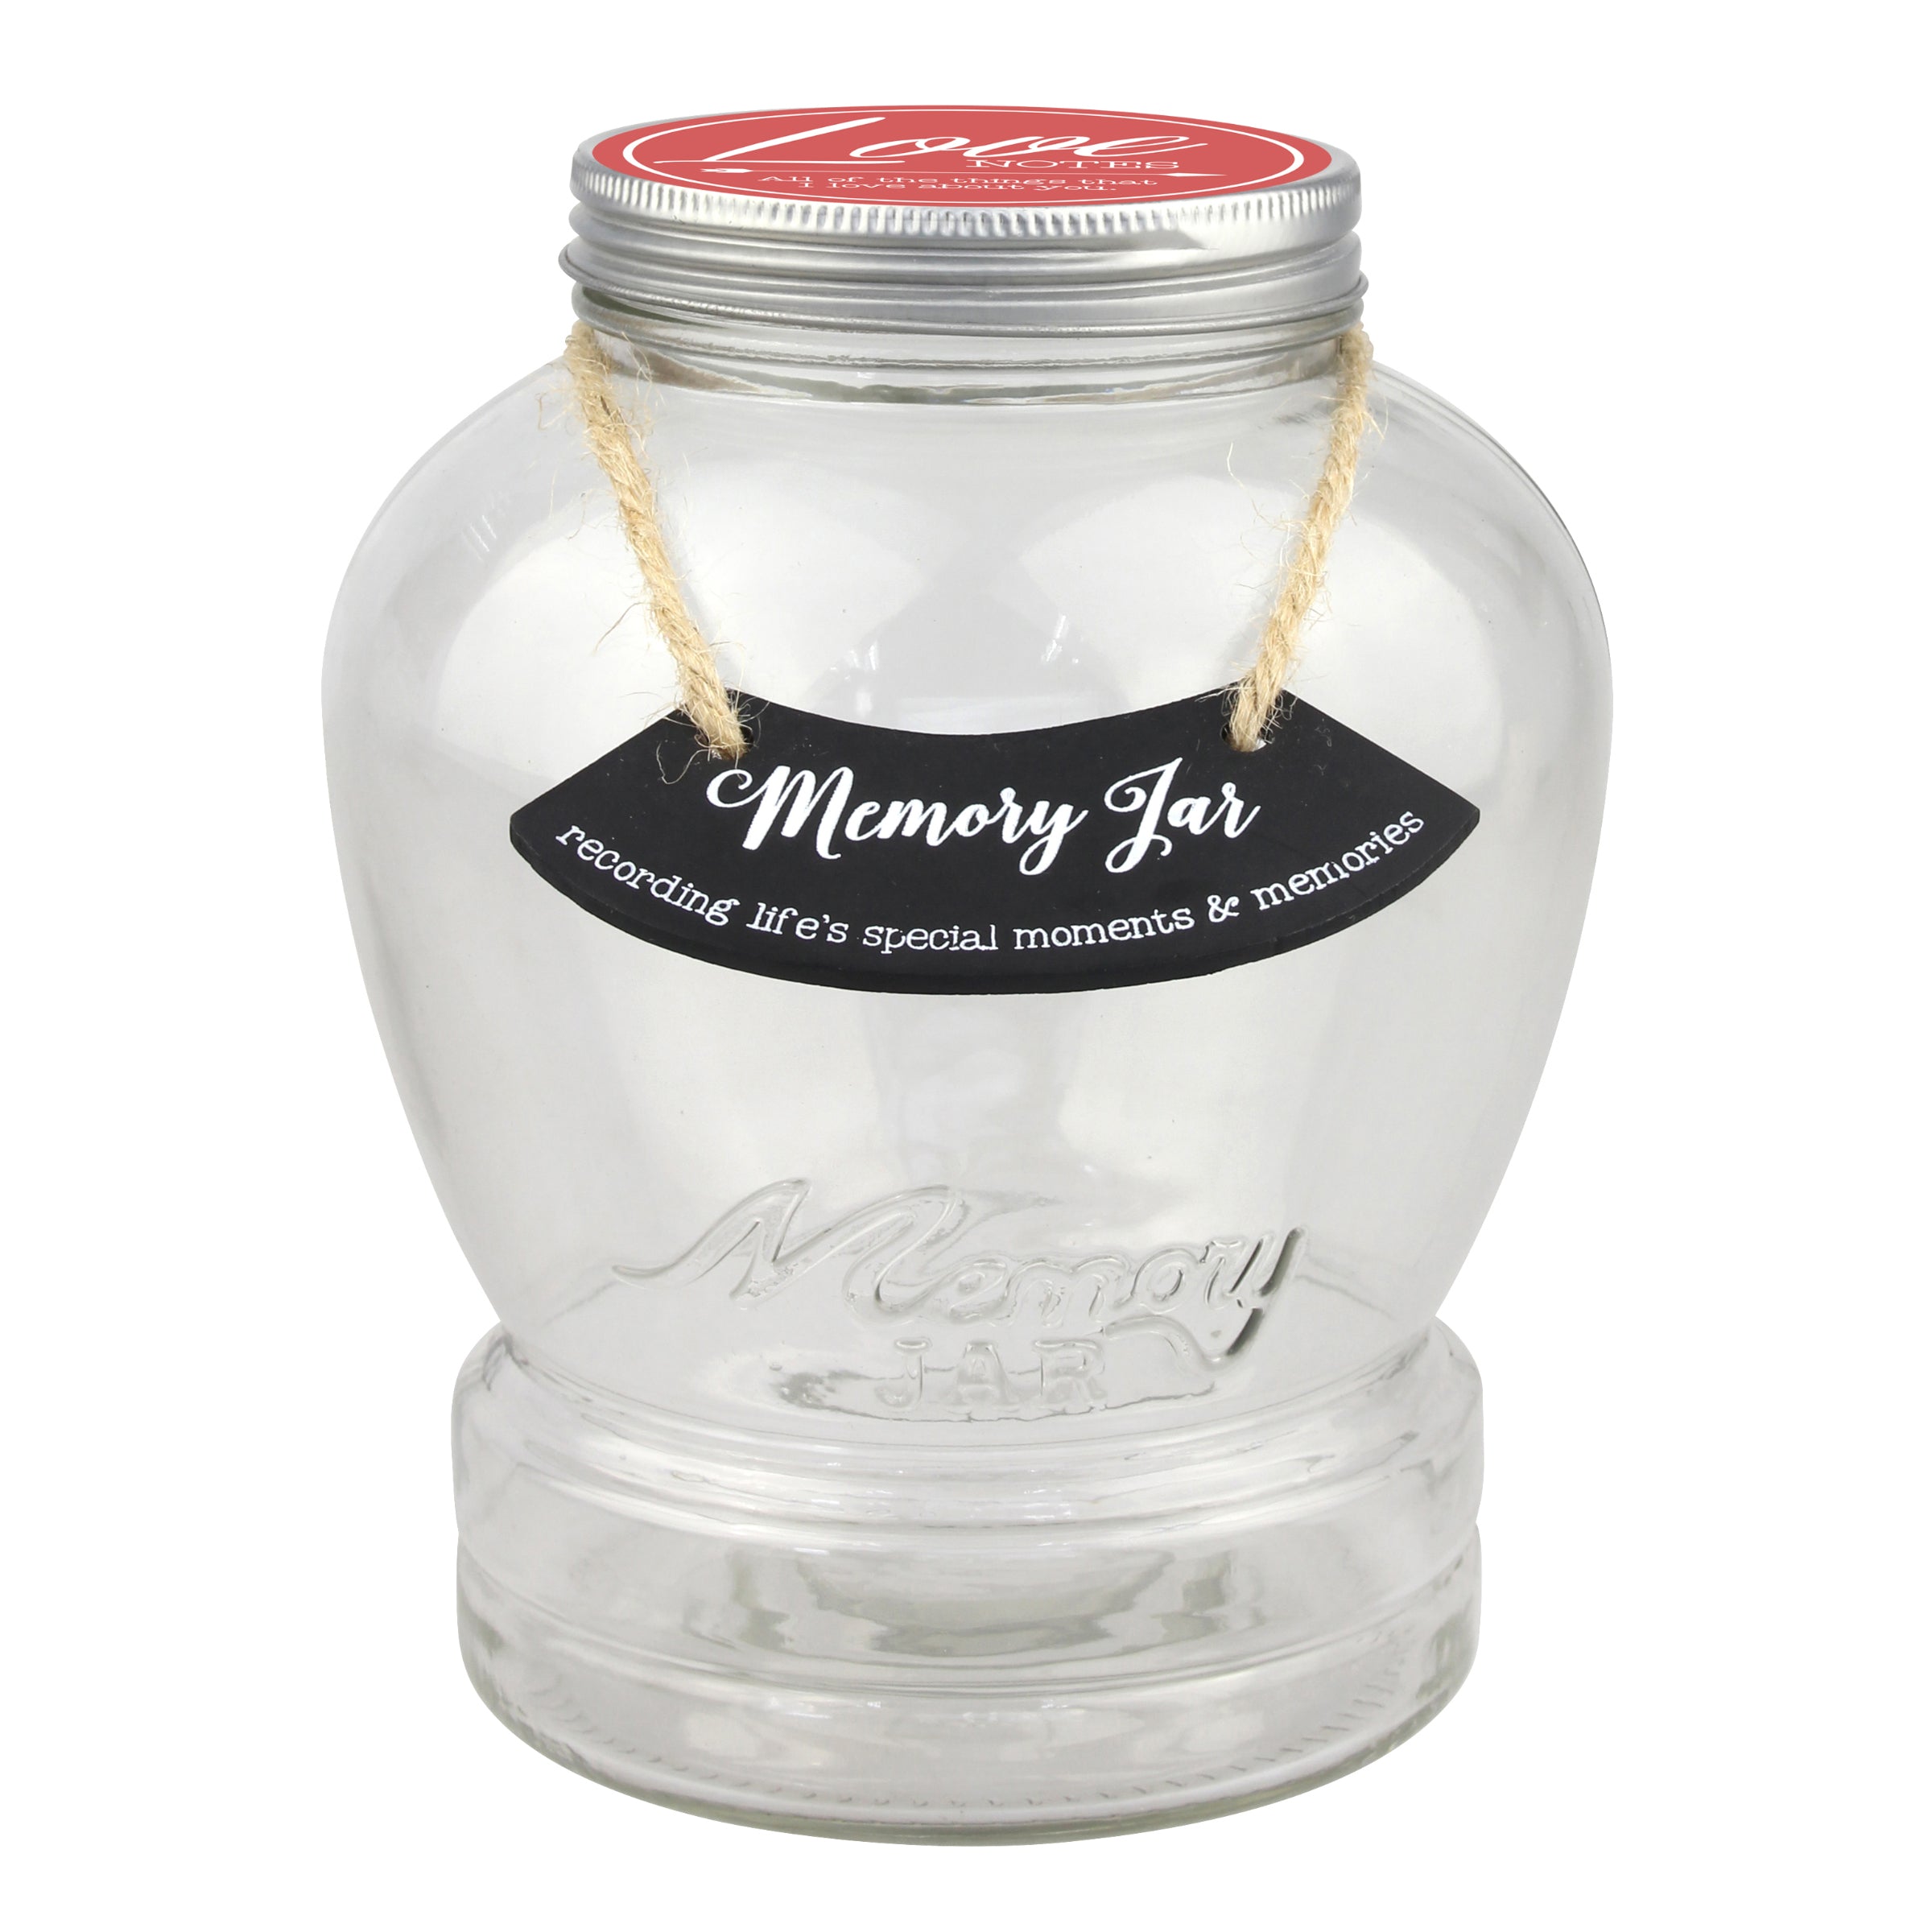 Top Shelf Love Notes Memory Jar Kit with 180 Tickets, Pen, and Decorative Lid